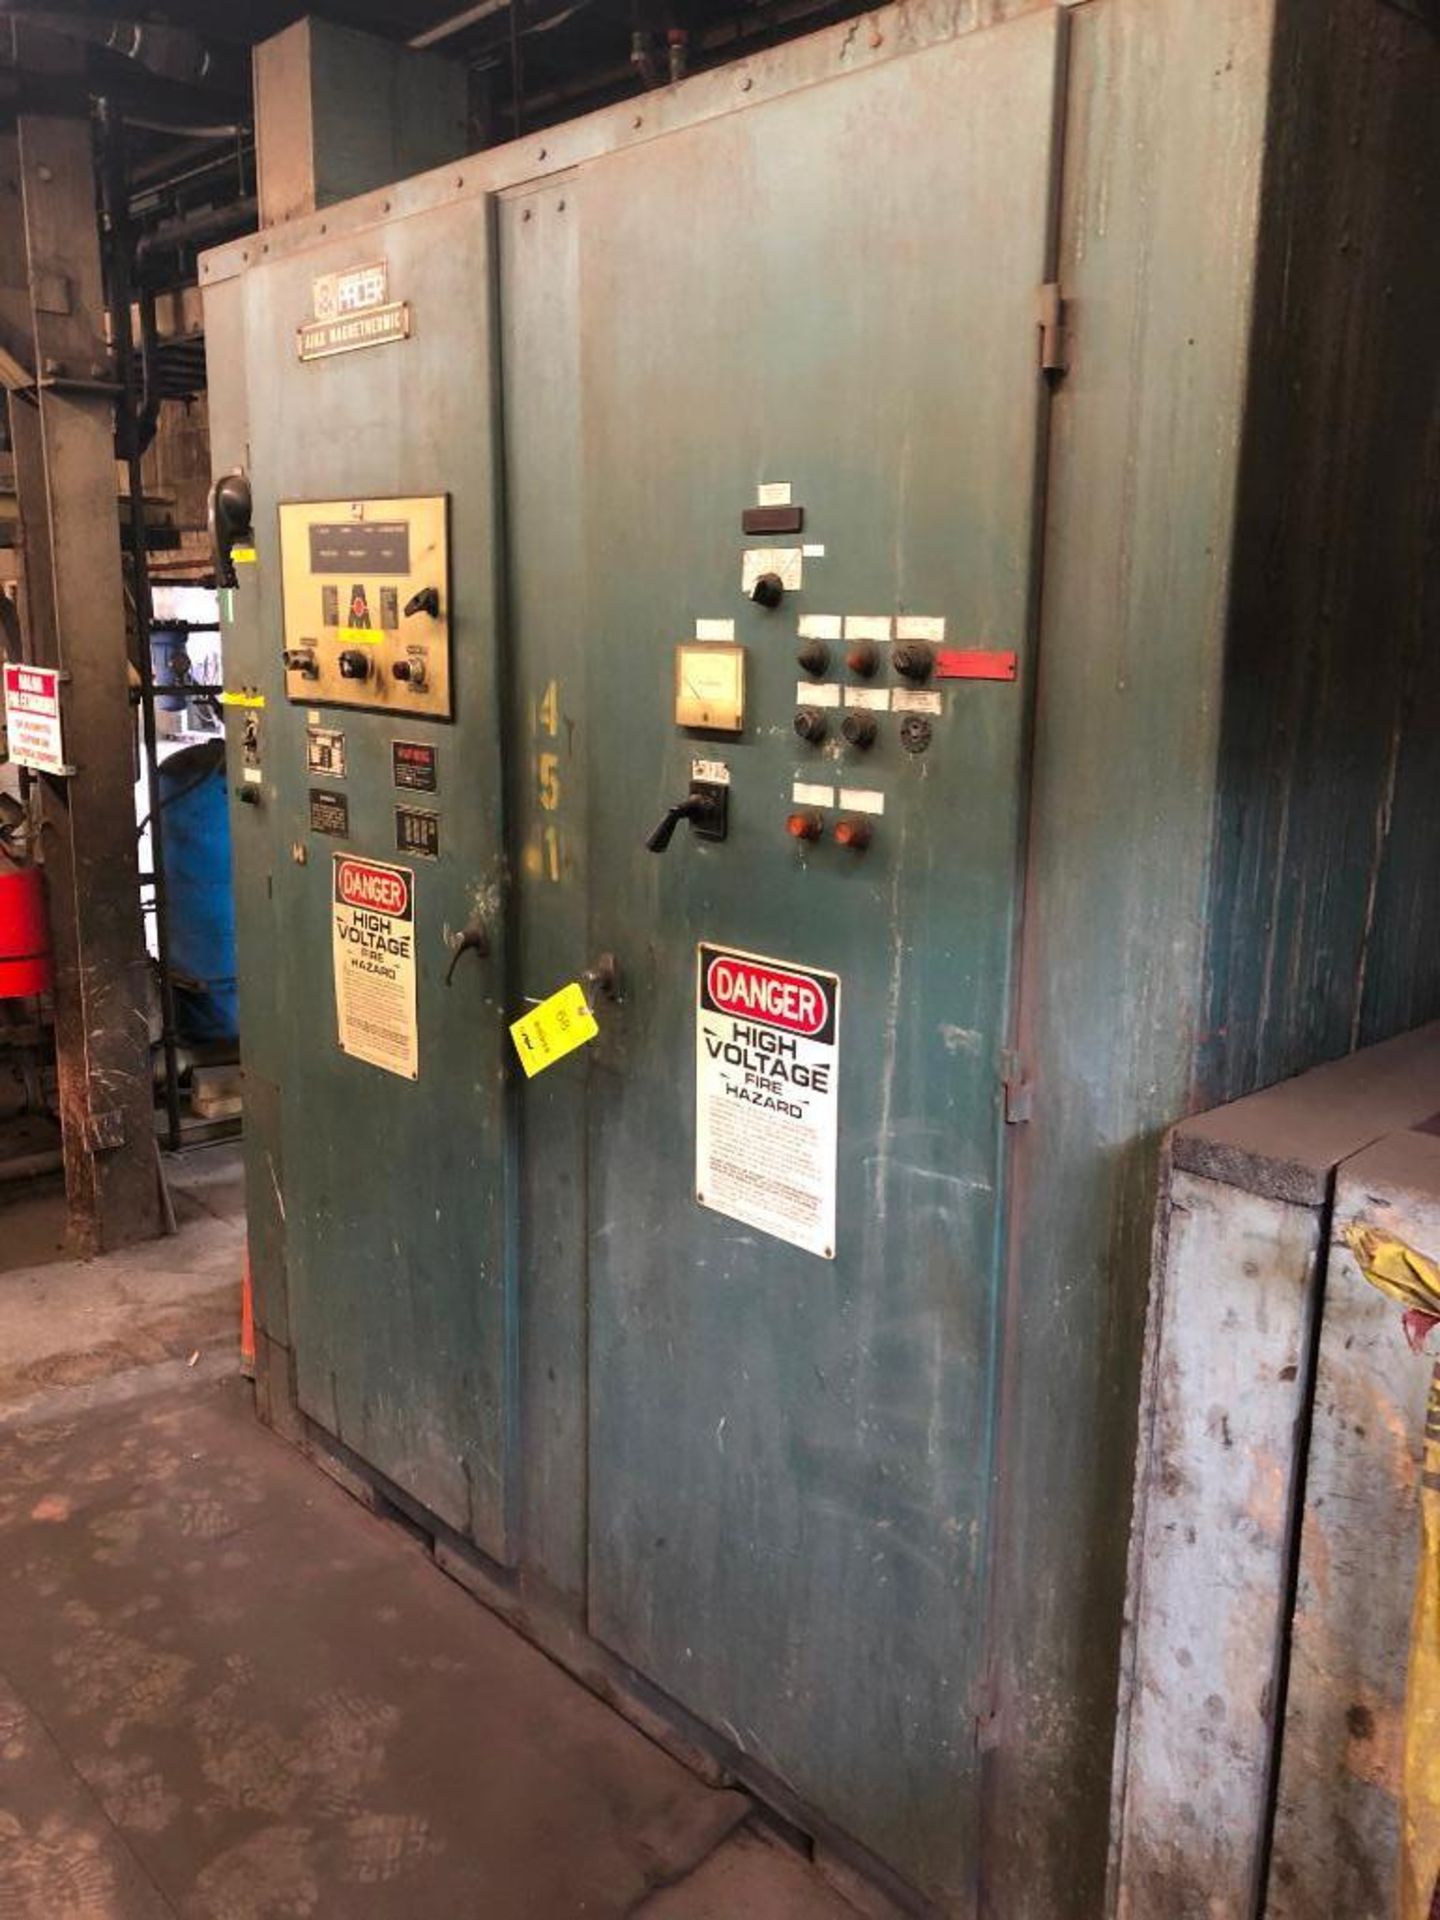 LOT: Ajax 750 kw Melt System with Ajax 750 kw 600-110 hz. Power Supply S/N M-96139A, Interconnecting